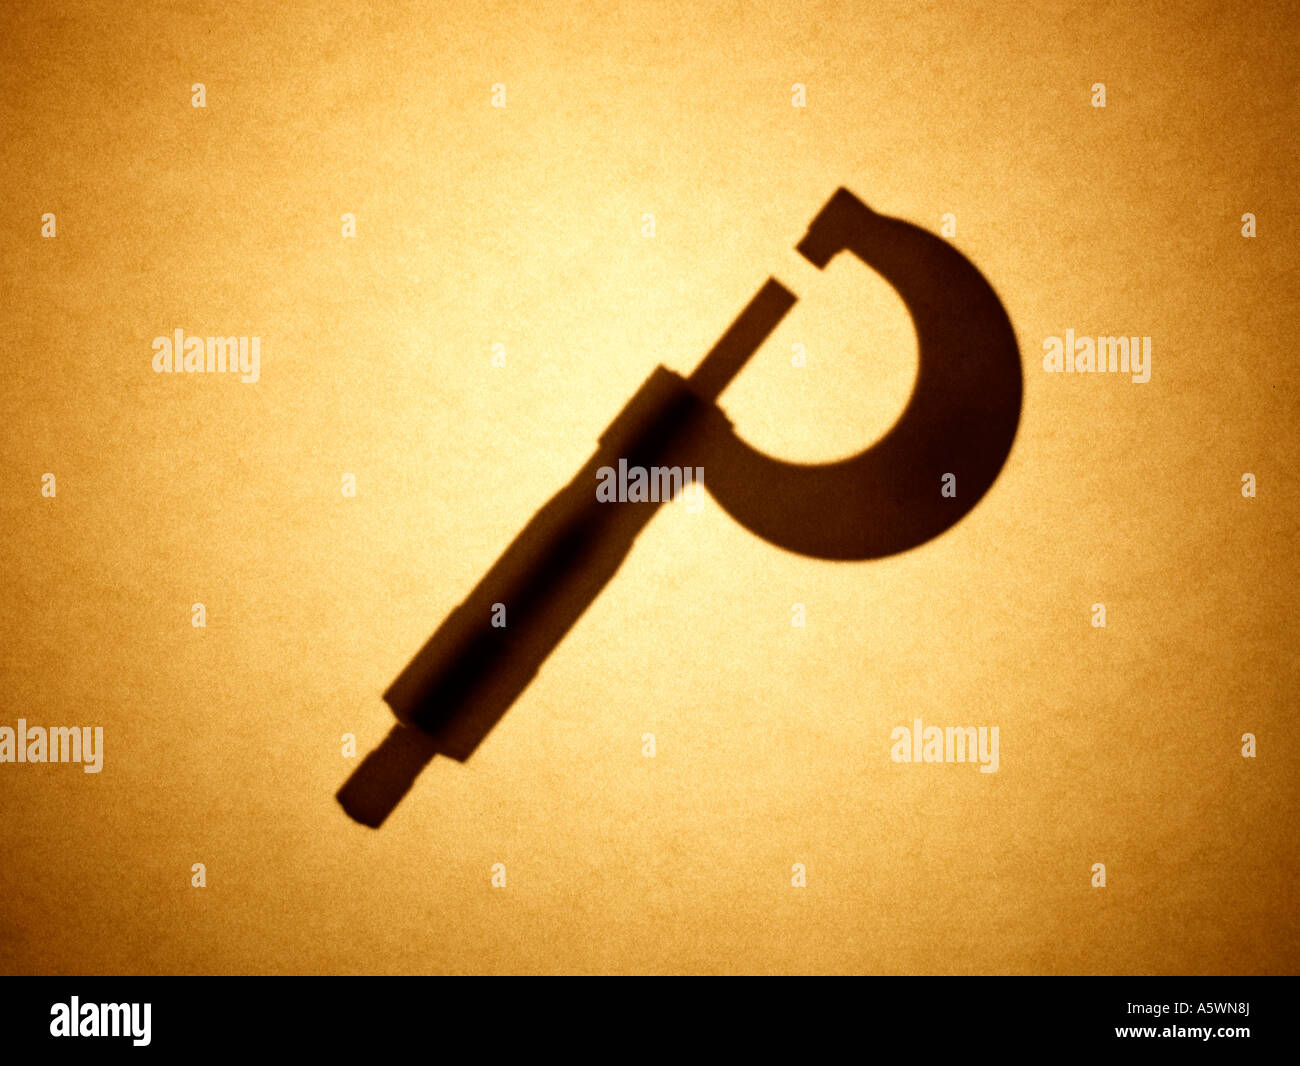 Instrument Calipers silhouette Stock Photo